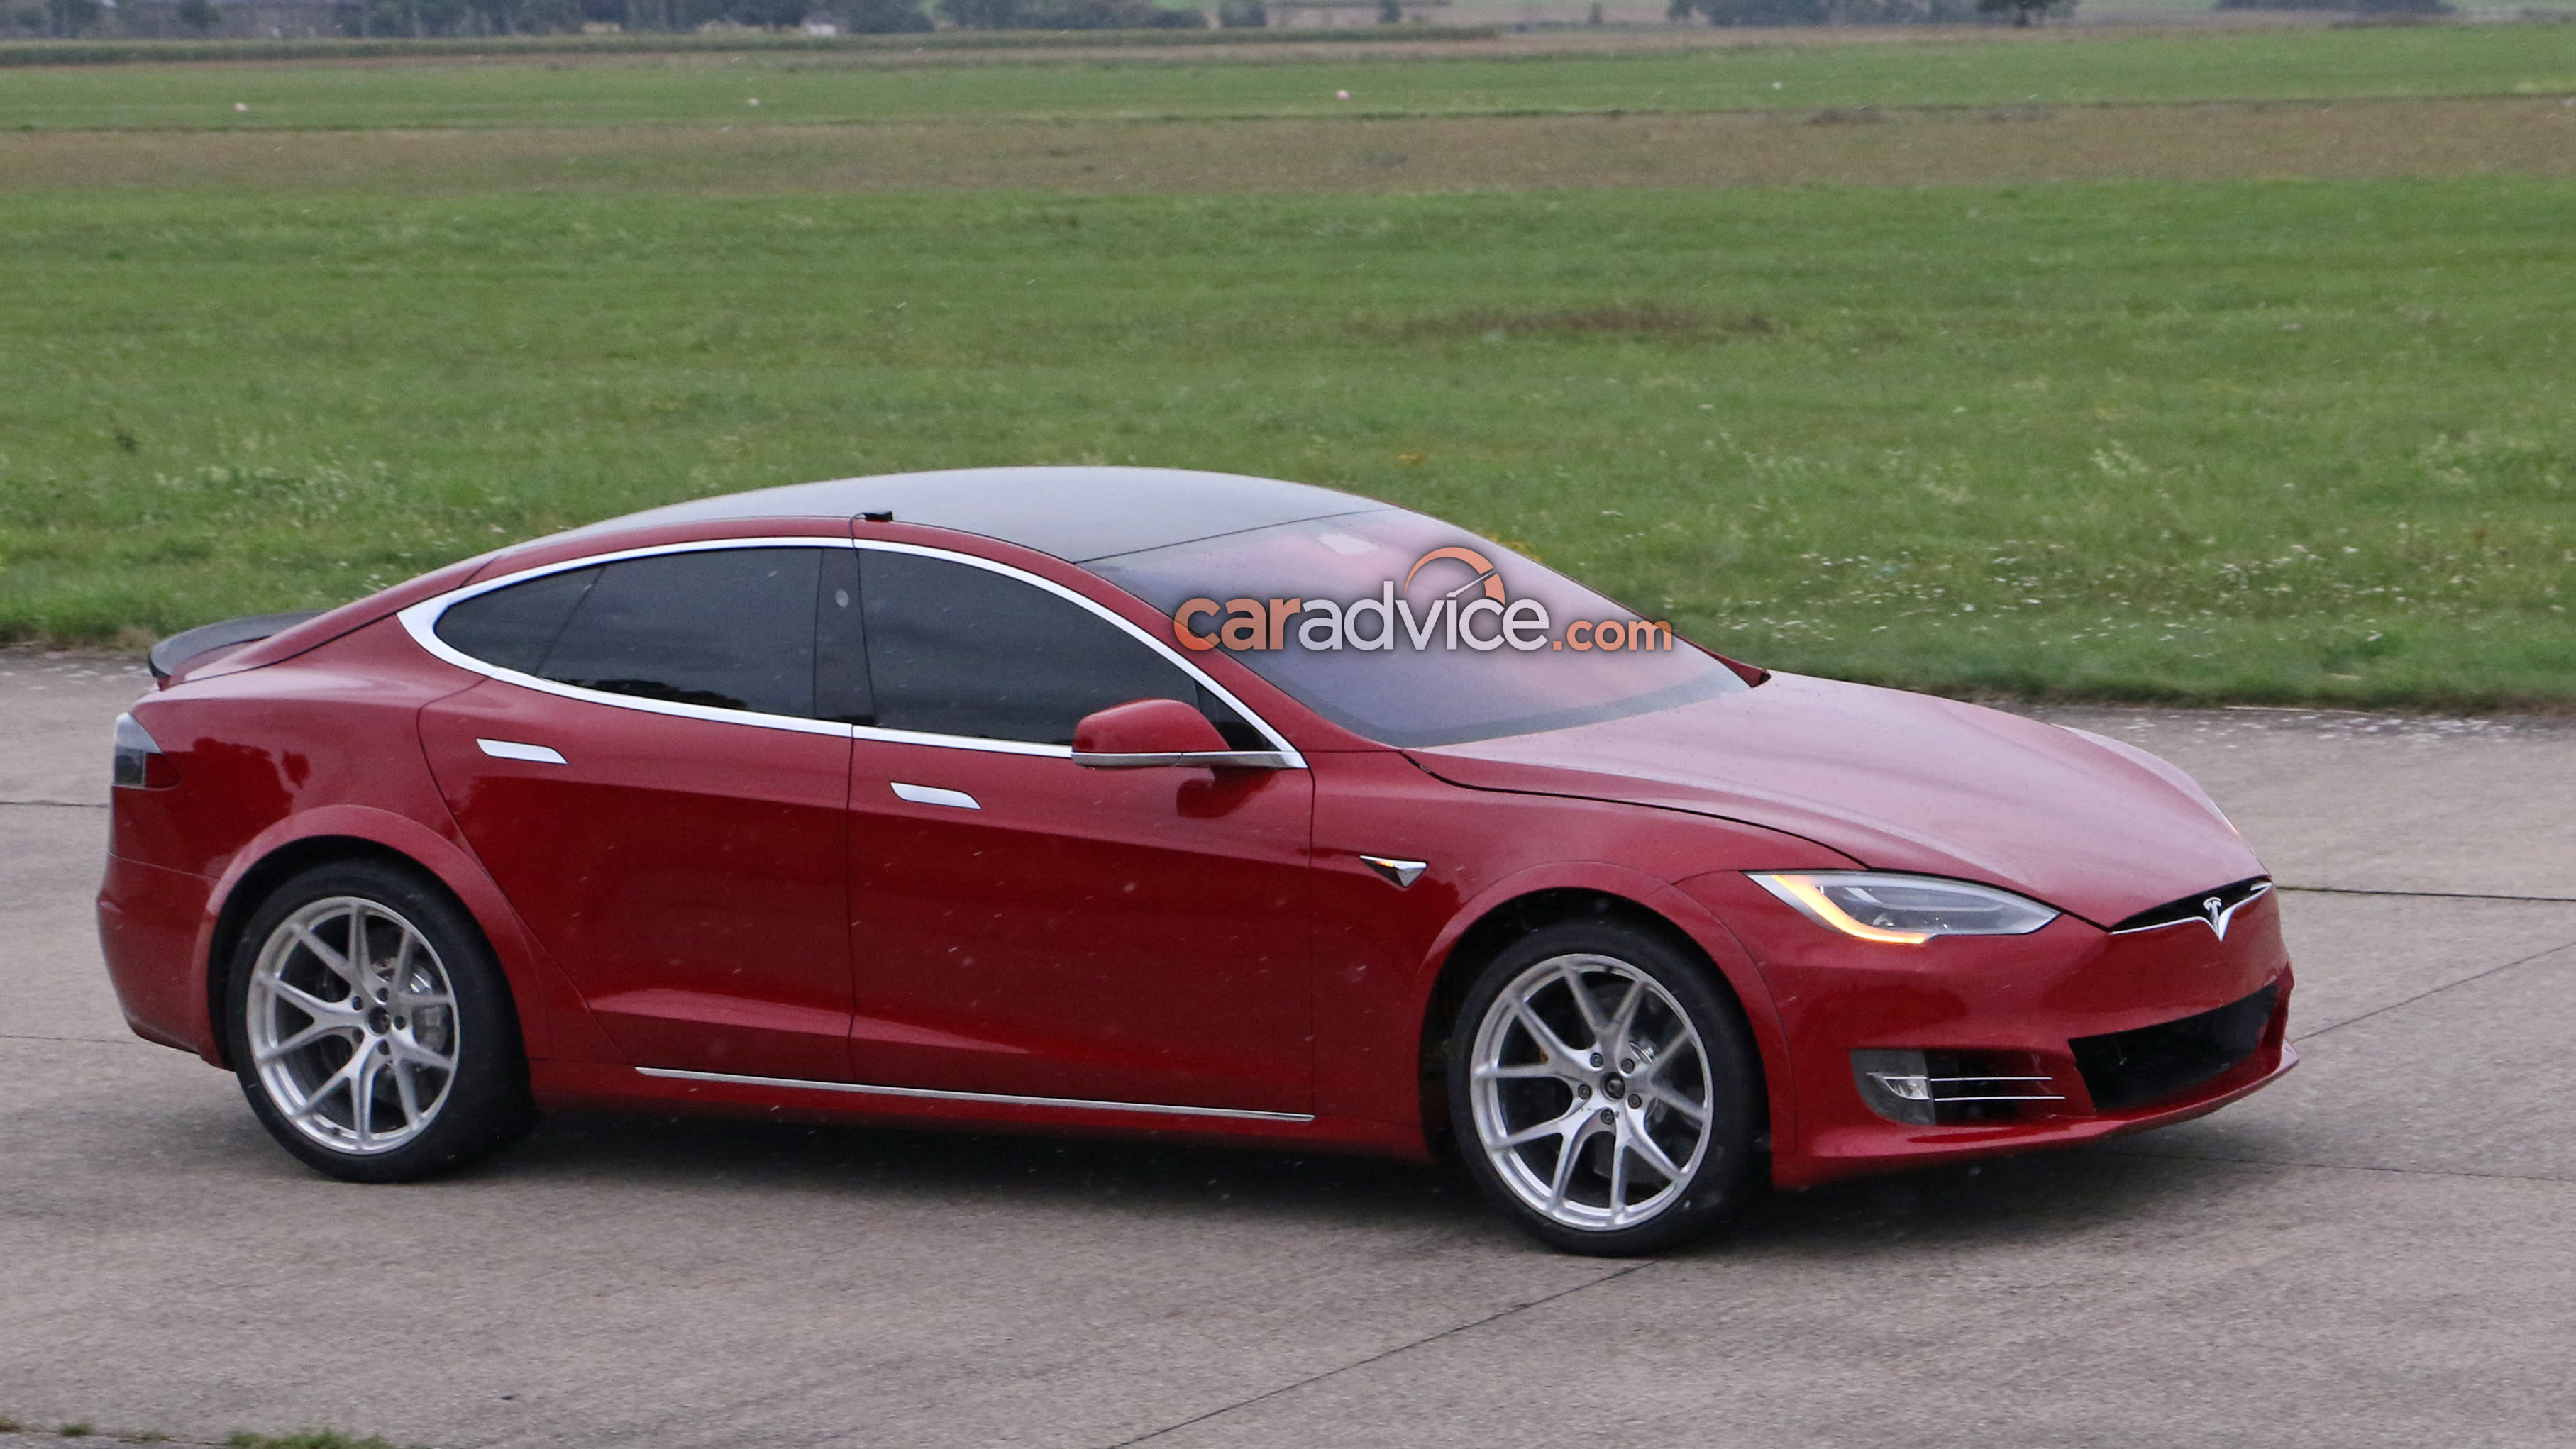 22 Tesla Model S Plaid A Hypercar With 840km Range Less Than 250k Update Lap Time Caradvice